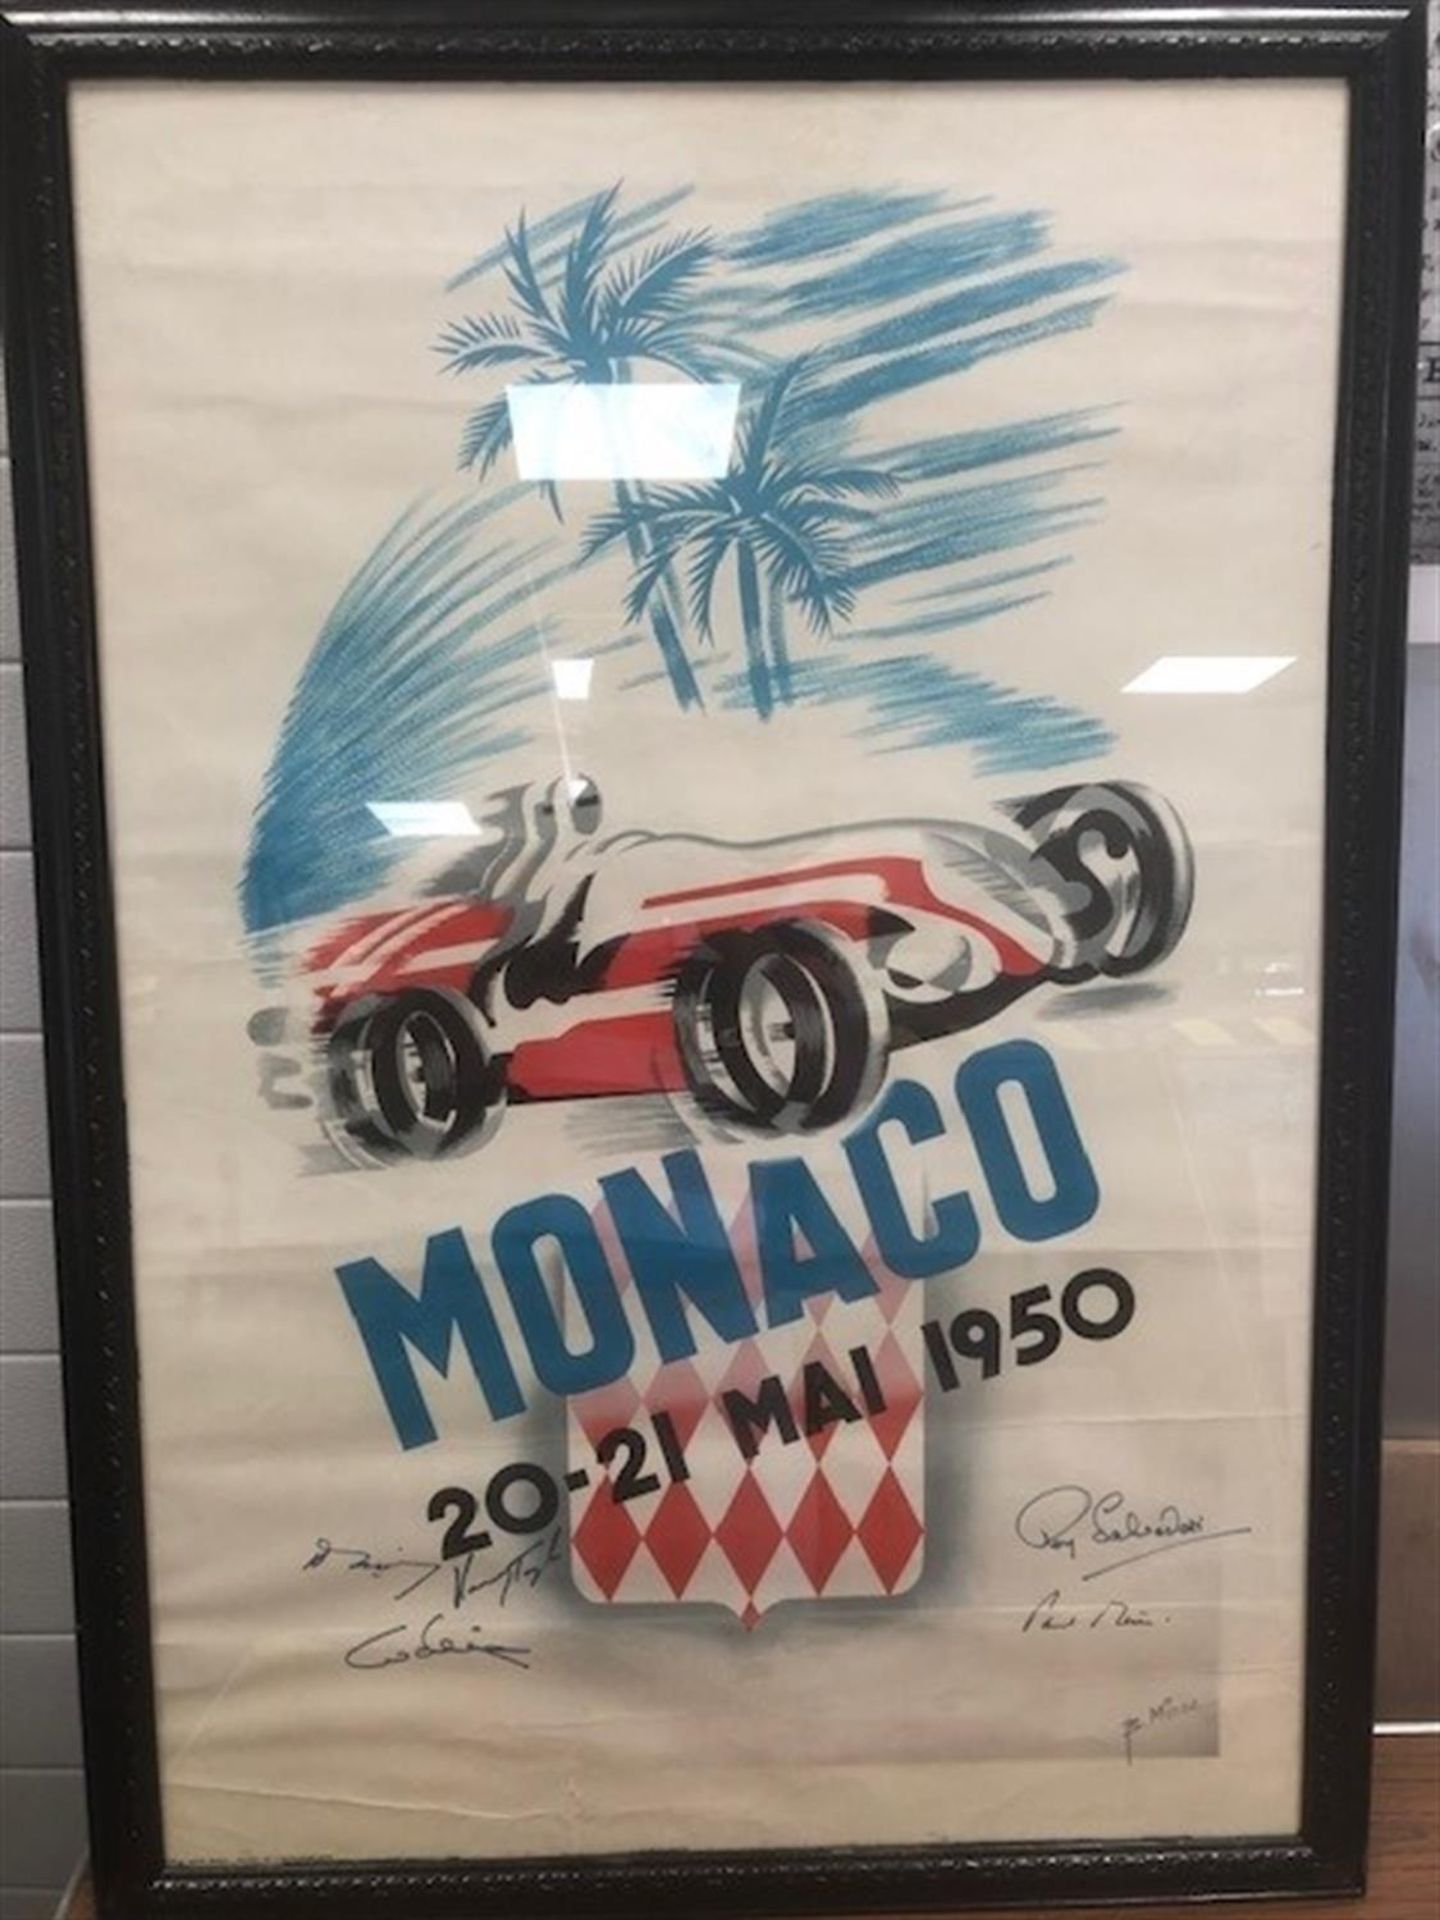 An Original Monaco Grand Prix Poster dated 20th/21st May 1950